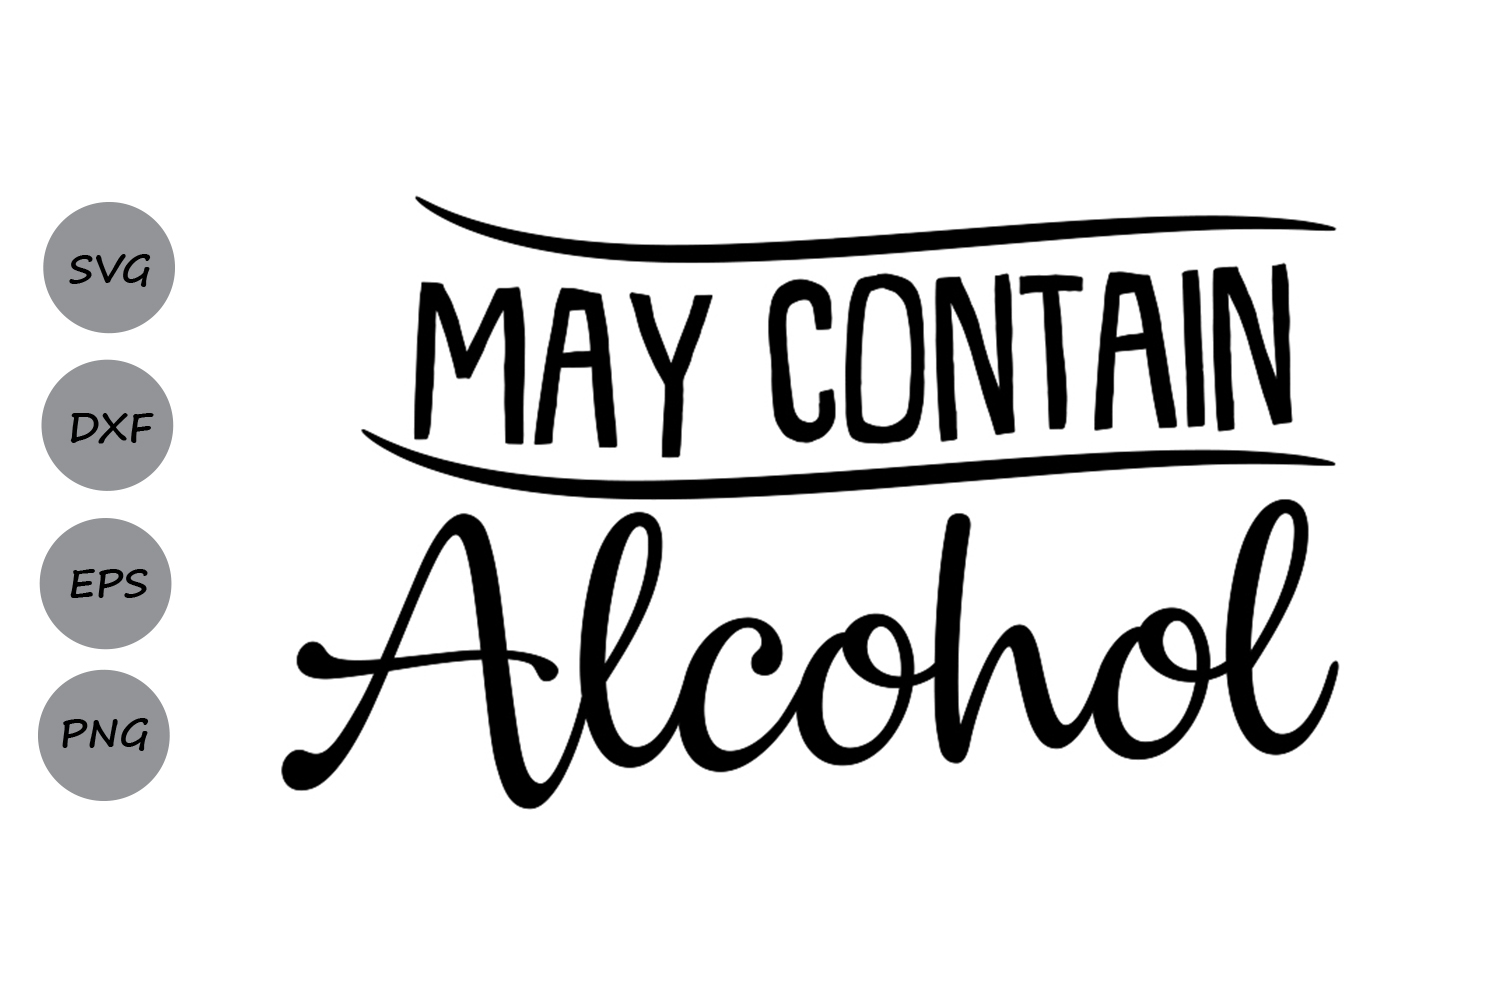 May Contain Alcohol Svg, Vacation Svg, Drinking Svg, Wine.